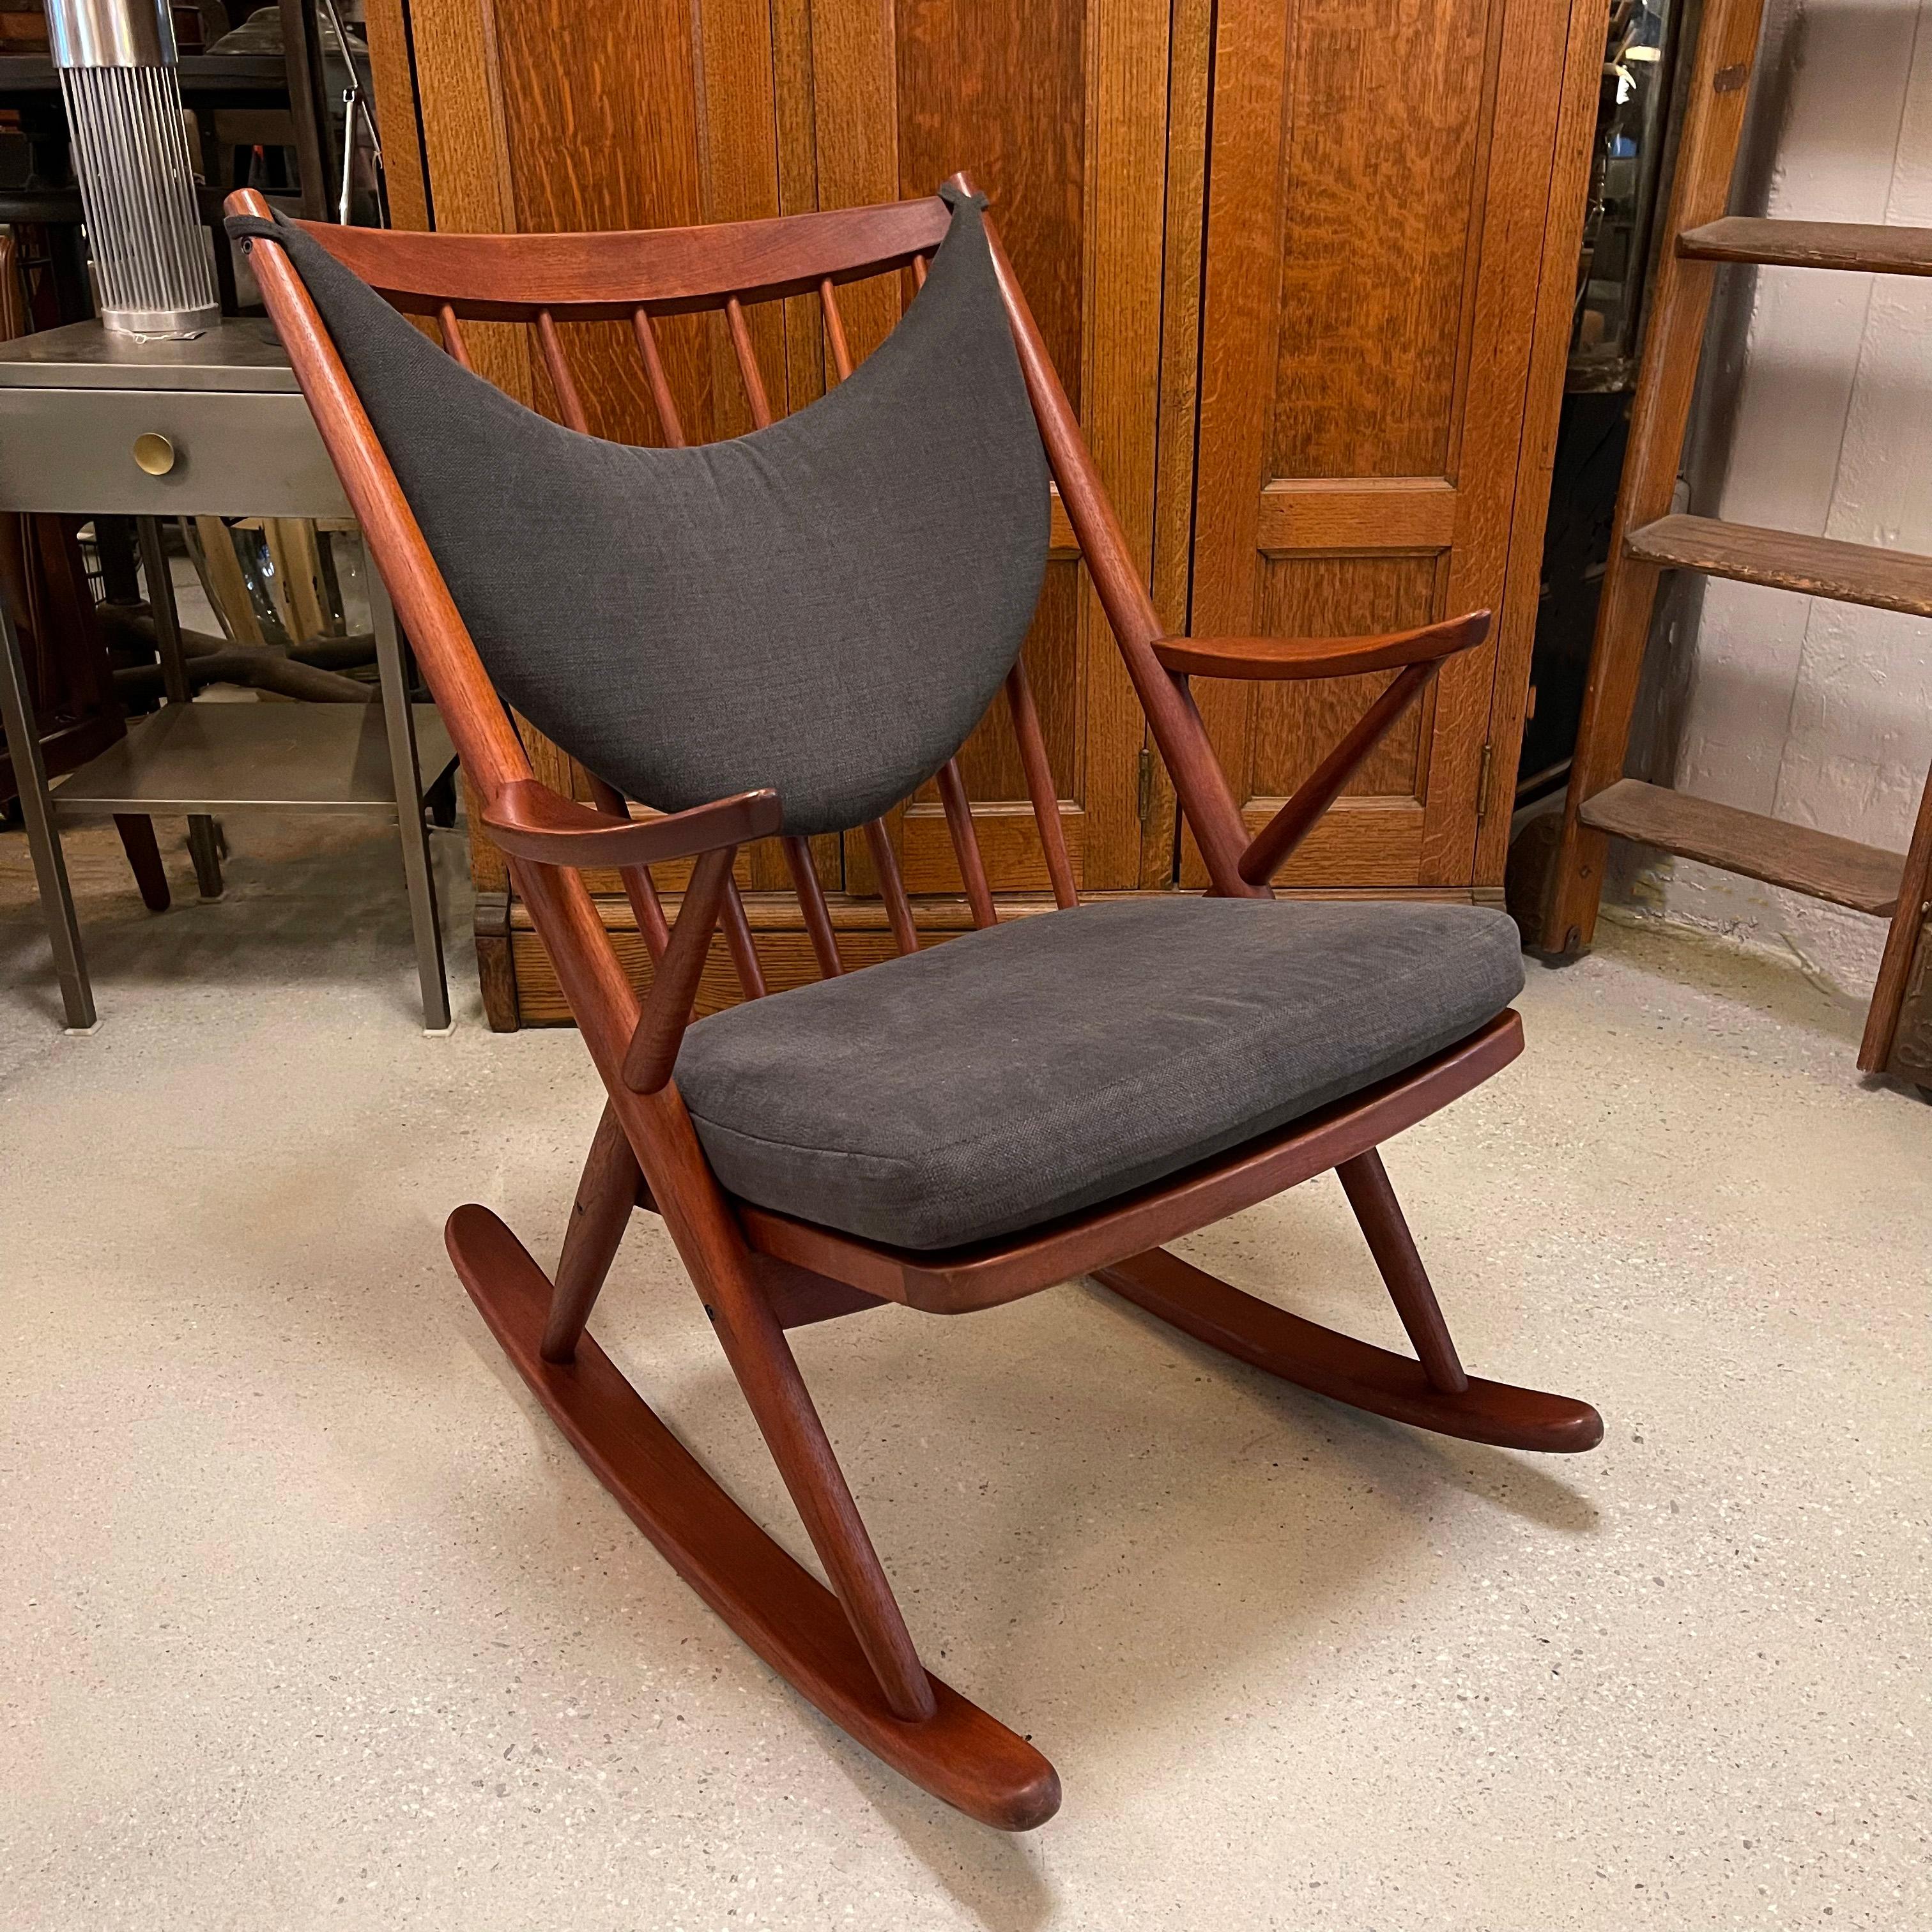 Danish modern, teak rocking chair by Frank Reenskaug for Bramin features a newly upholstered seat and back in gray brushed cotton.
 